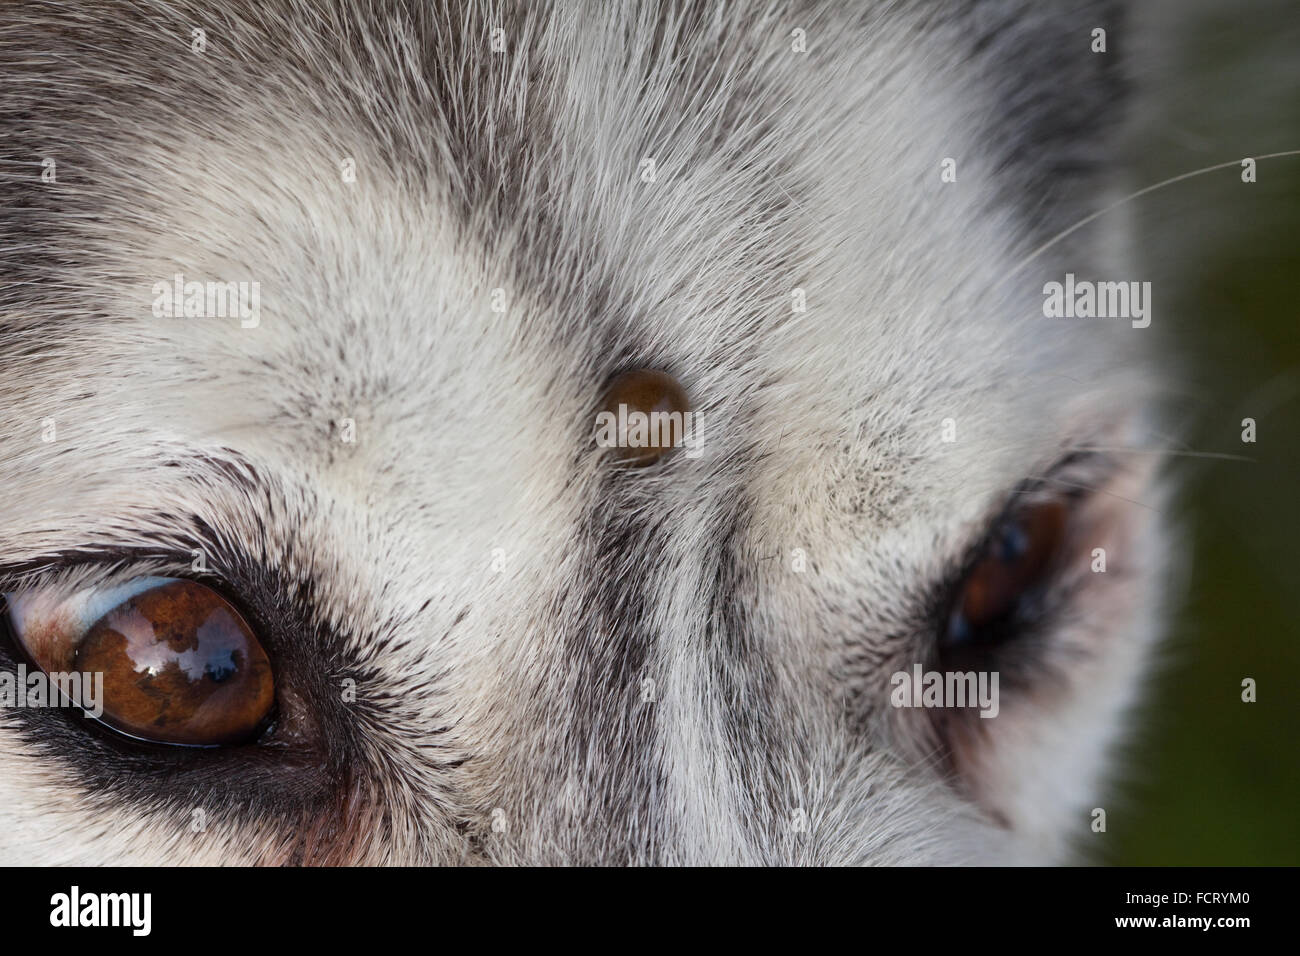 Siberian Husky. Dog. Canis lupus familiaris.  Forehead. Note tick, Ixodes ricinus, embedded on forehead between eyes. Stock Photo